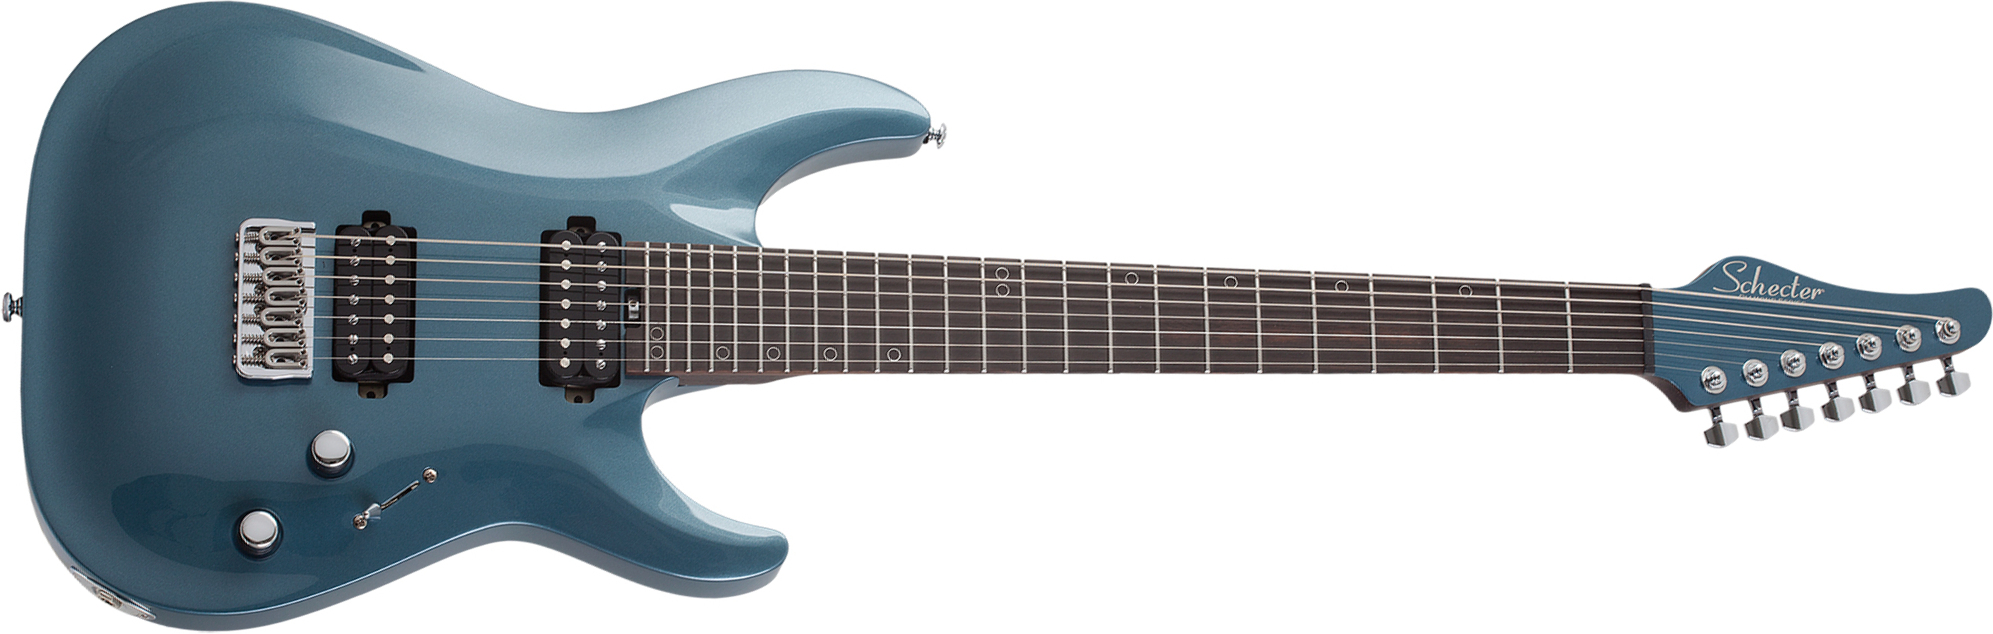 Schecter Aaron Marshall Am-7 Signature 2h Ht Eb - Cobalt Slate - 7 string electric guitar - Main picture